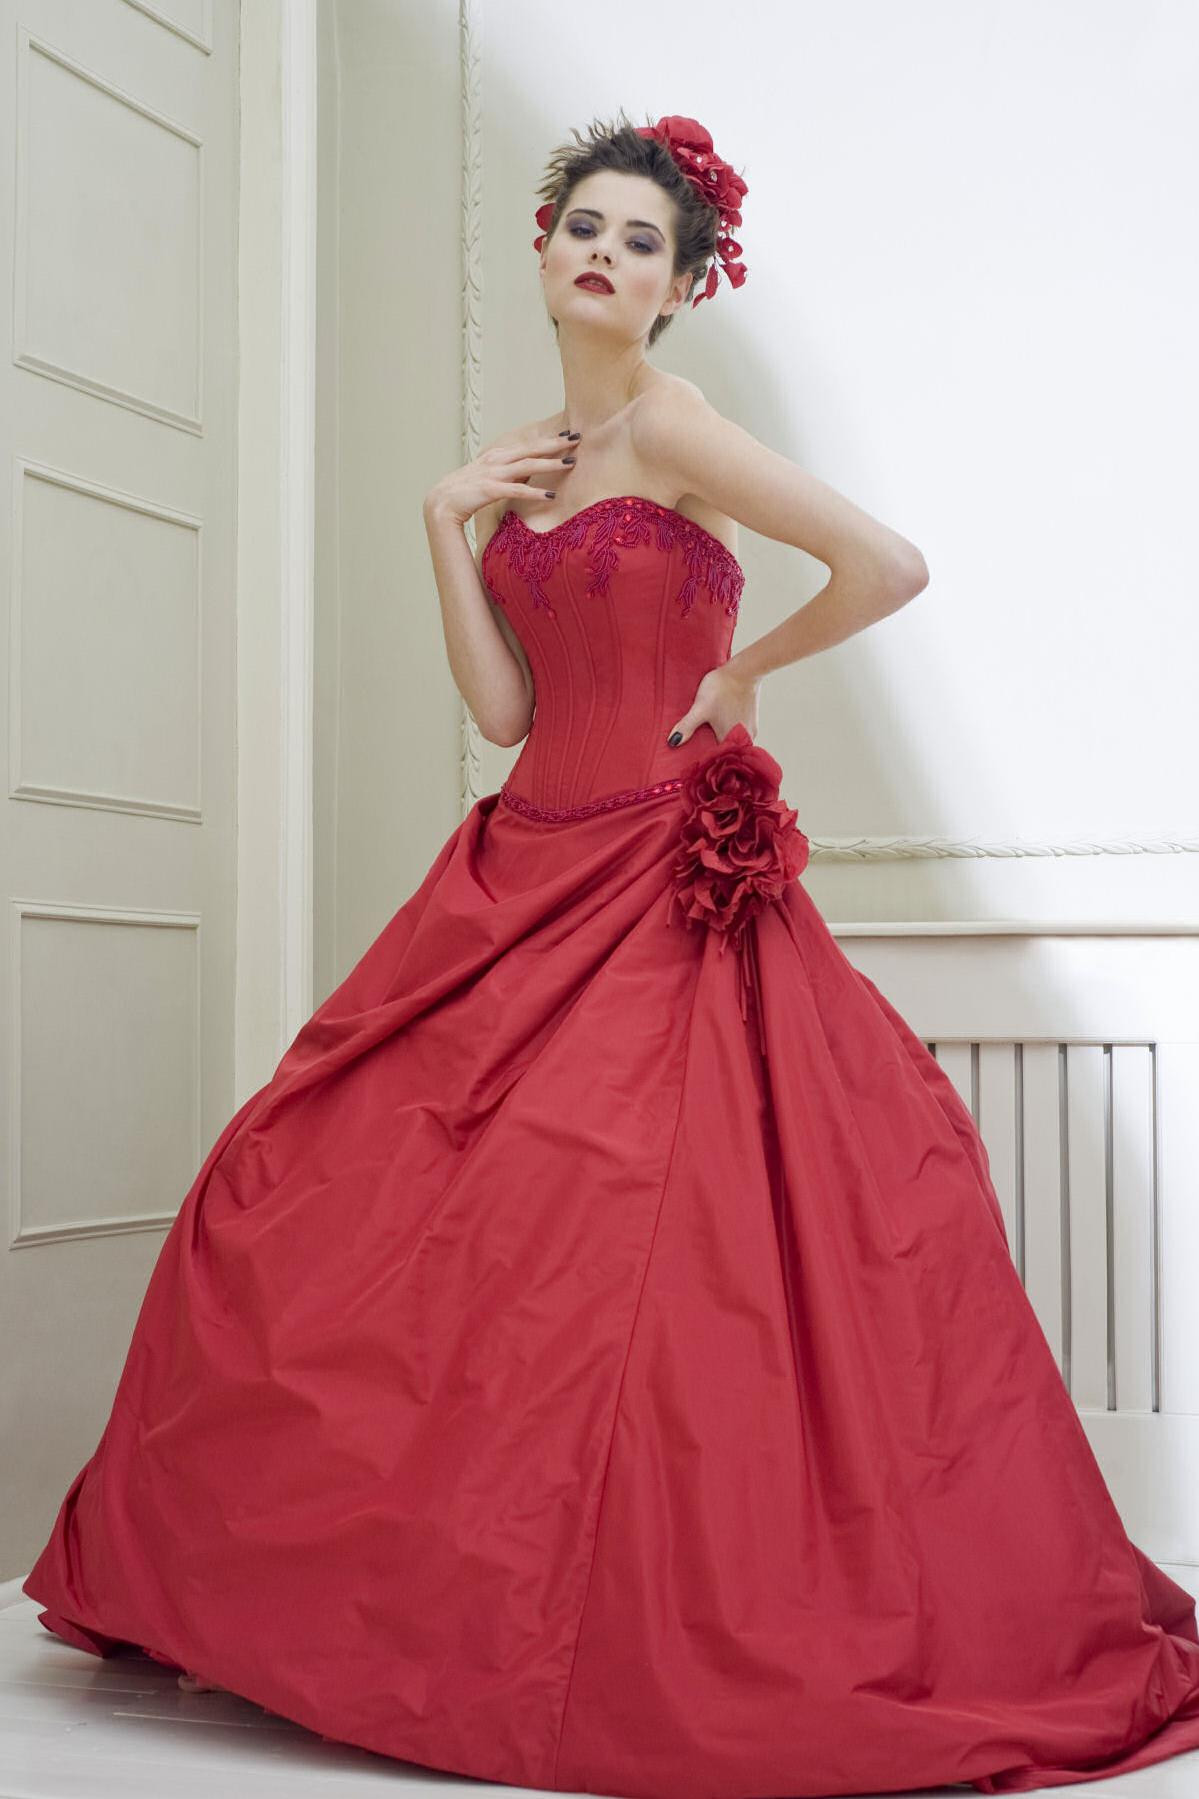 Wedding Dresses With Red Top Review wedding dresses with red - Find the ...